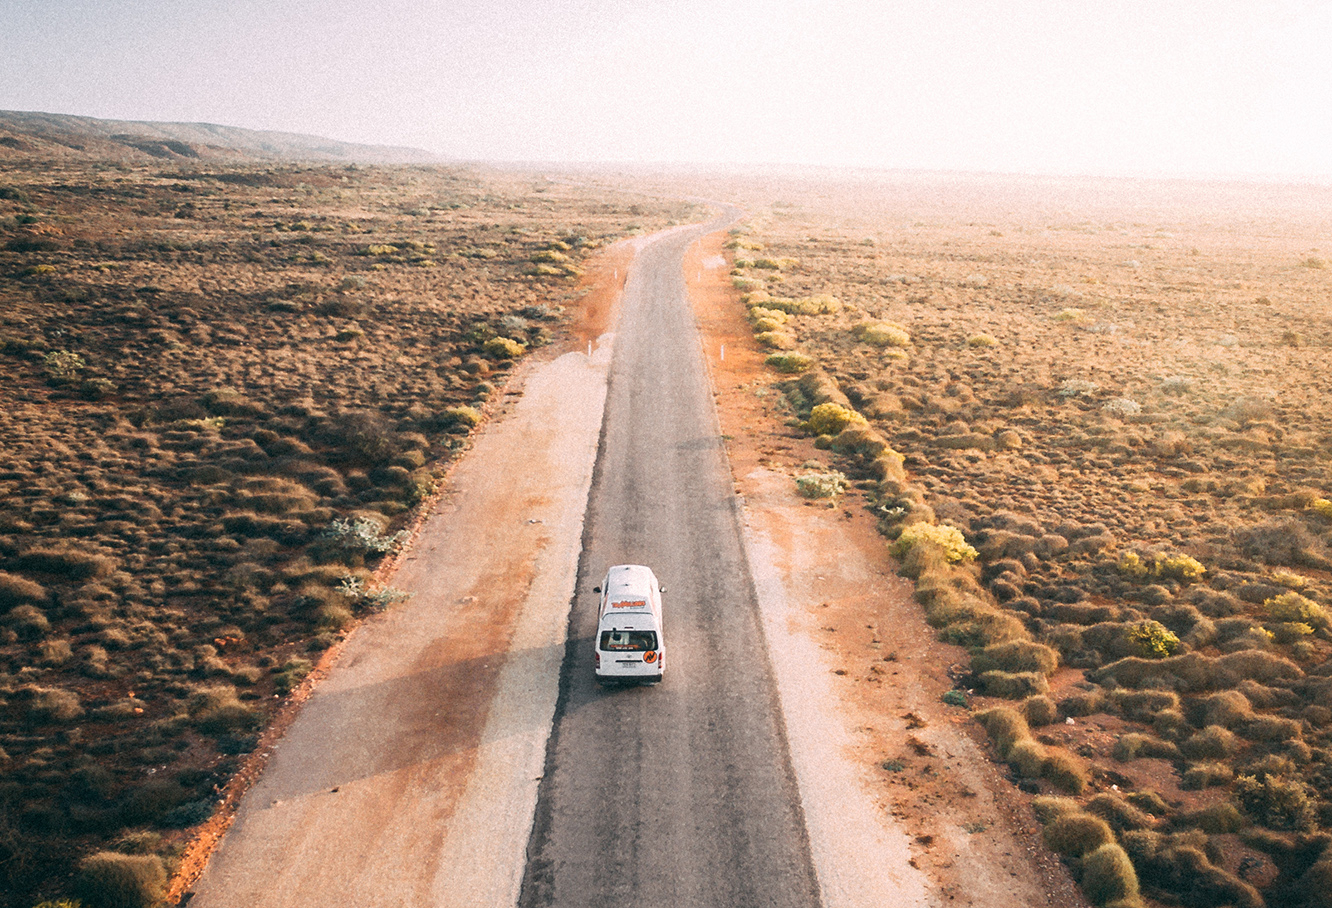 The School of Travels: Taking a Road Trip Around the World